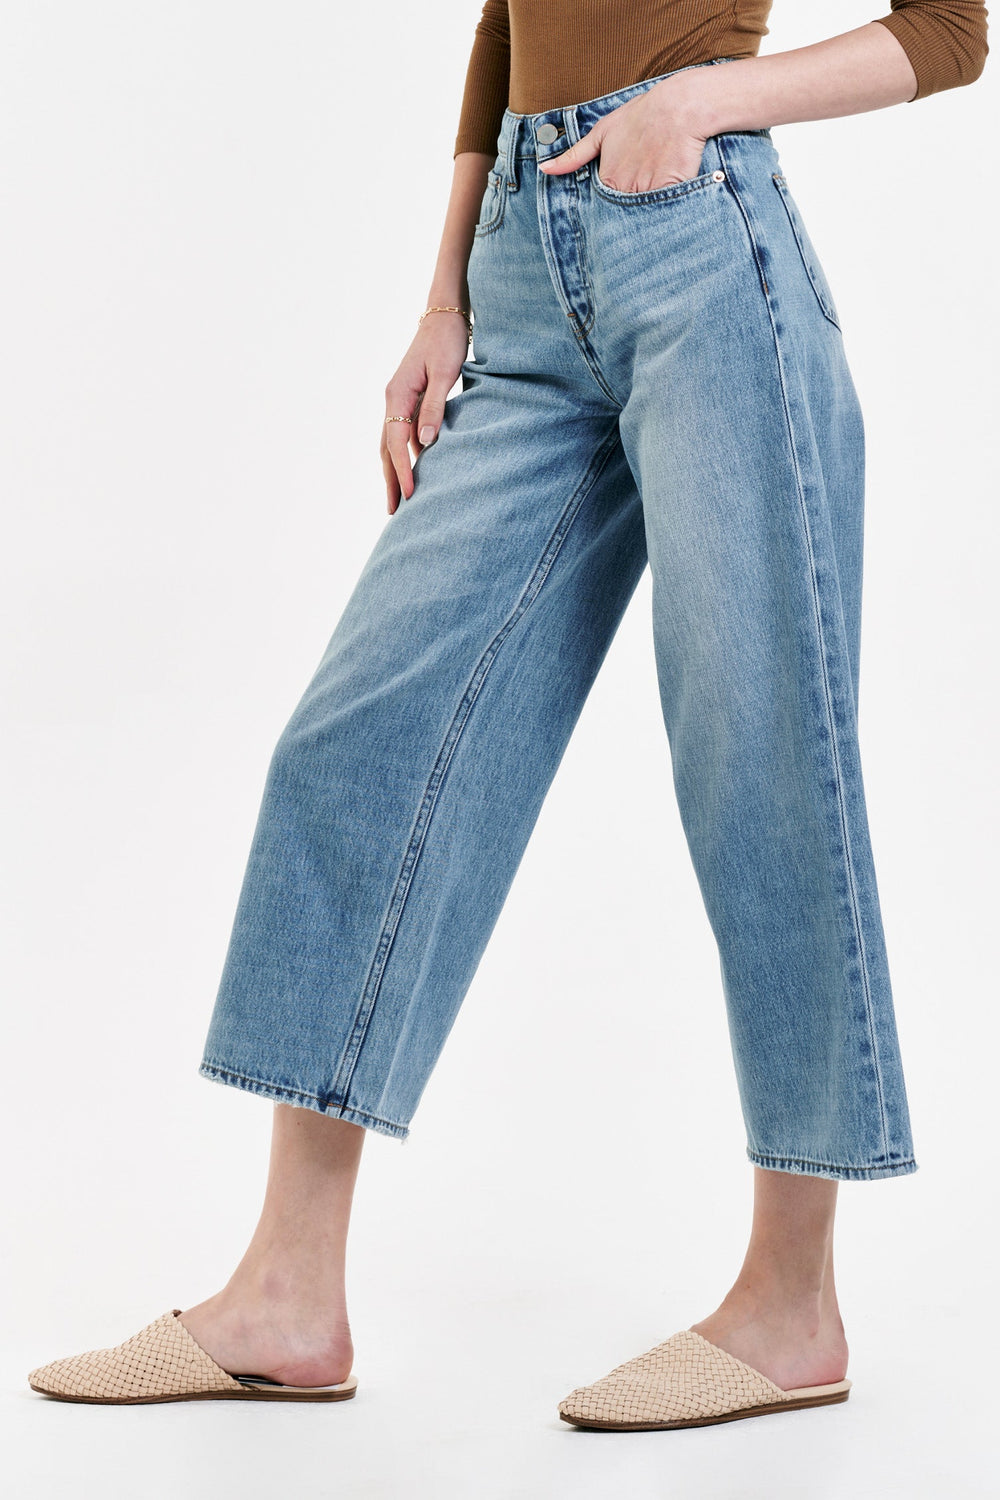 image of a female model wearing a SAMANTHA SUPER HIGH RISE CROPPED WIDE LEG JEANS KEARNEY JEANS